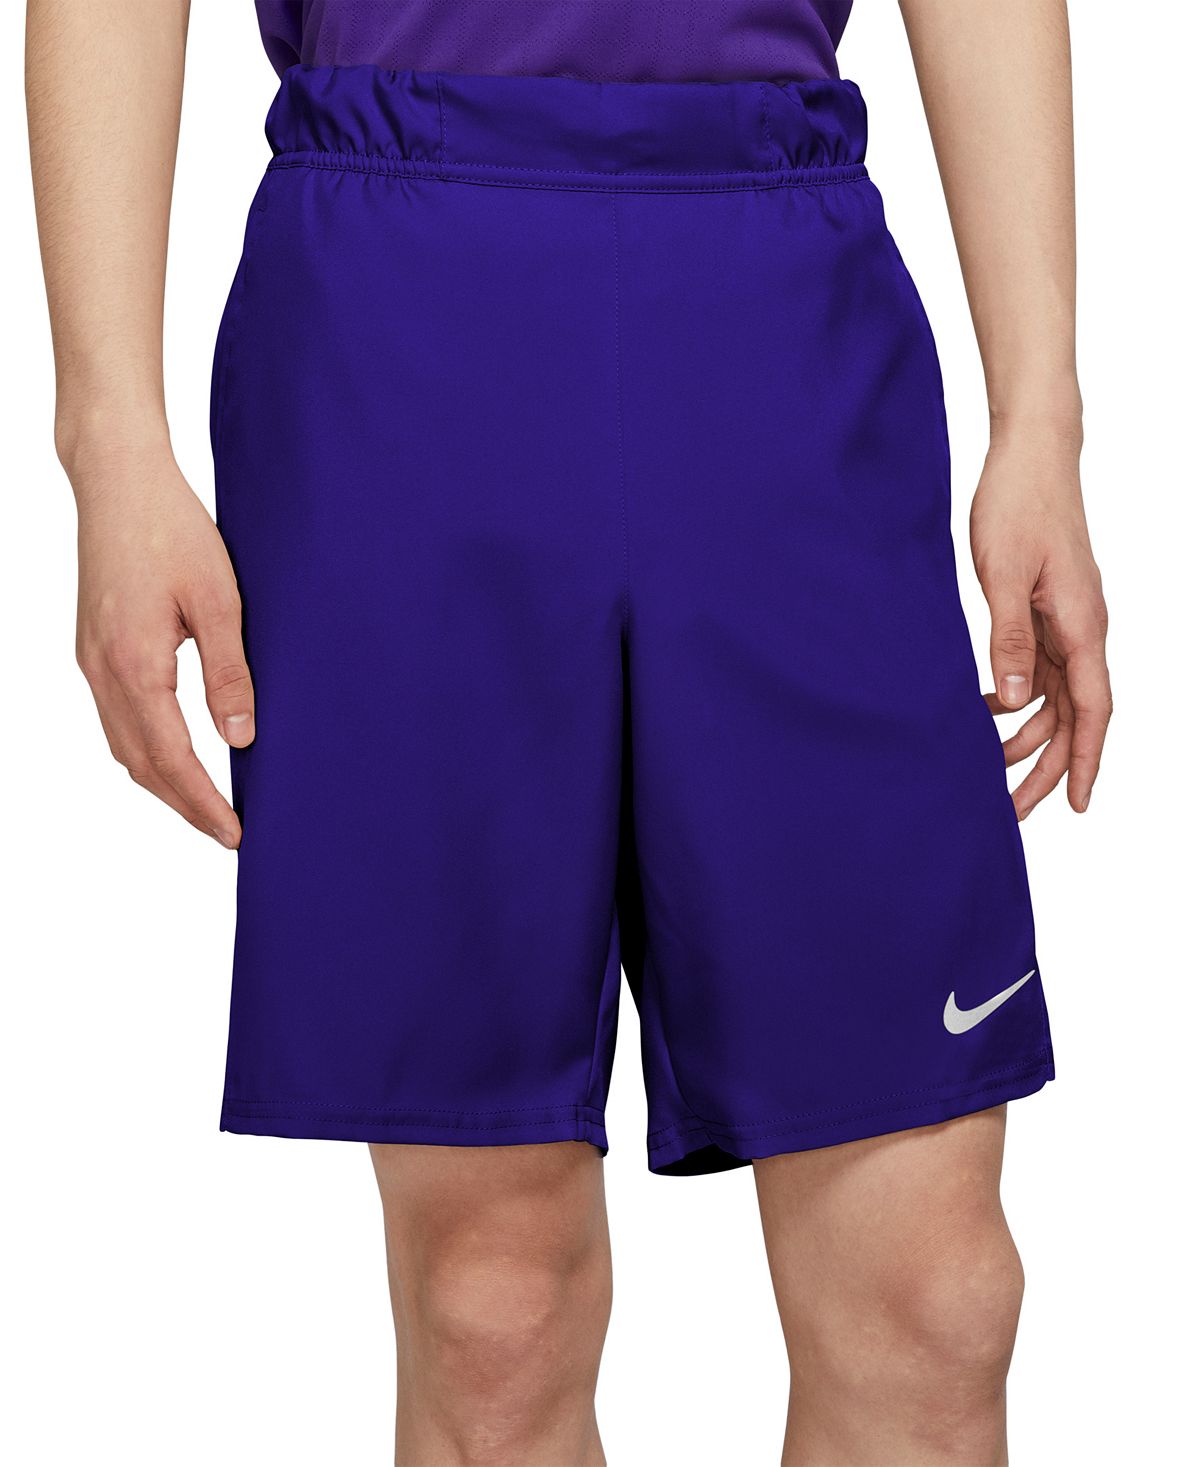 Nike court Dri-fit Victory 9" Tennis Shorts Concord